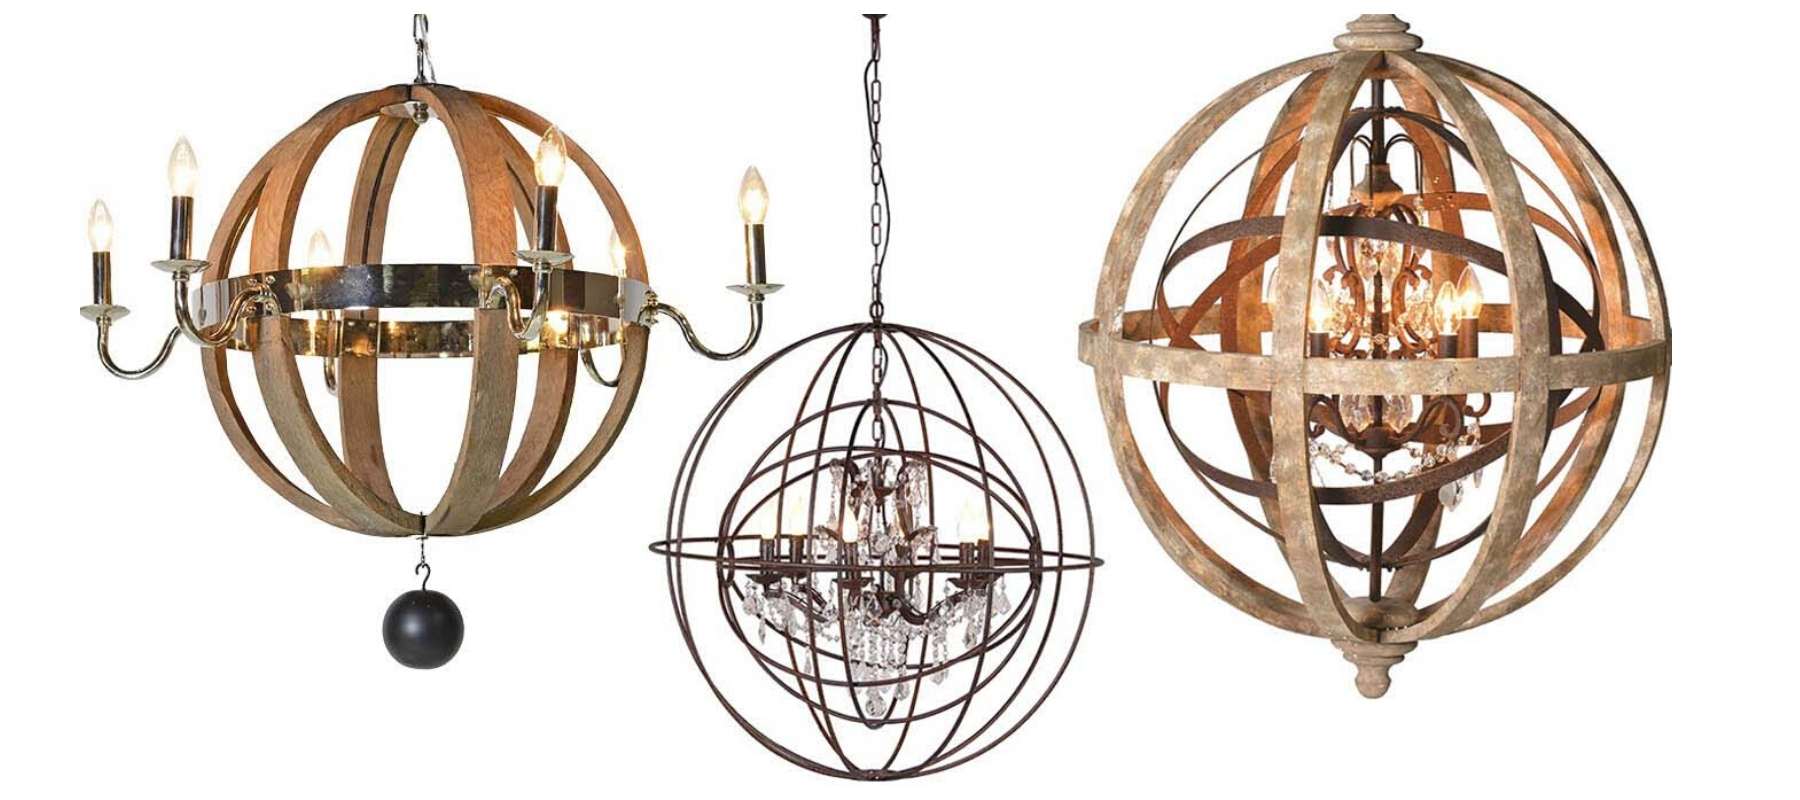 Collection of Kennedy Industrial pendant lights